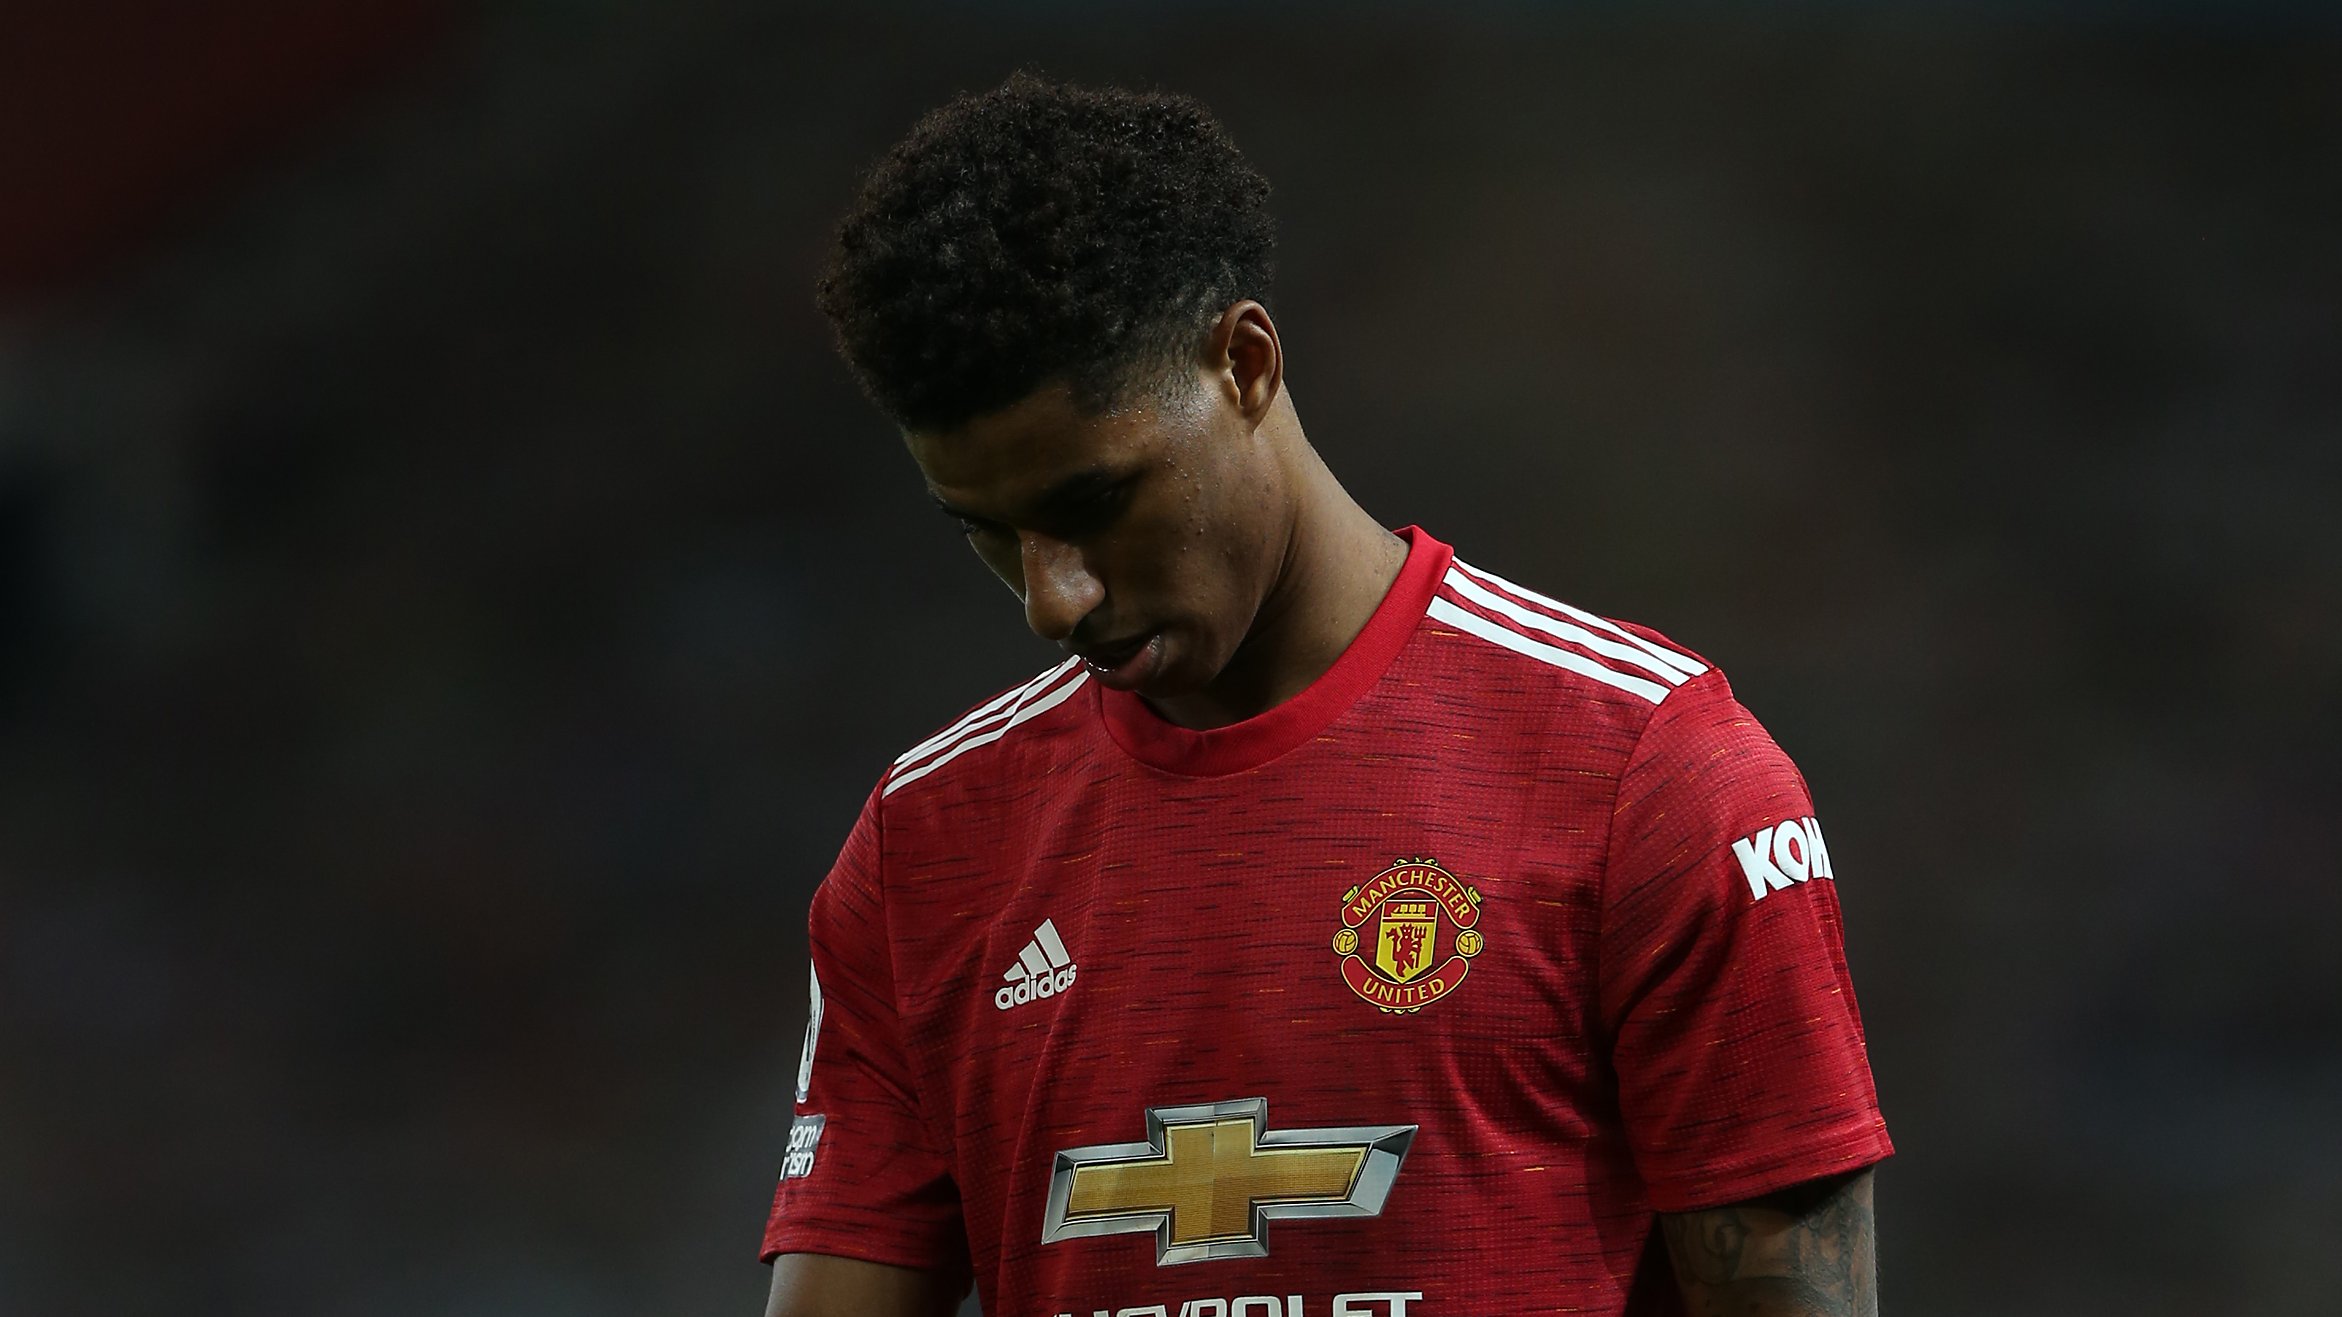 Marcus Rashford gives a honest judgement on his current form for Manchester United.